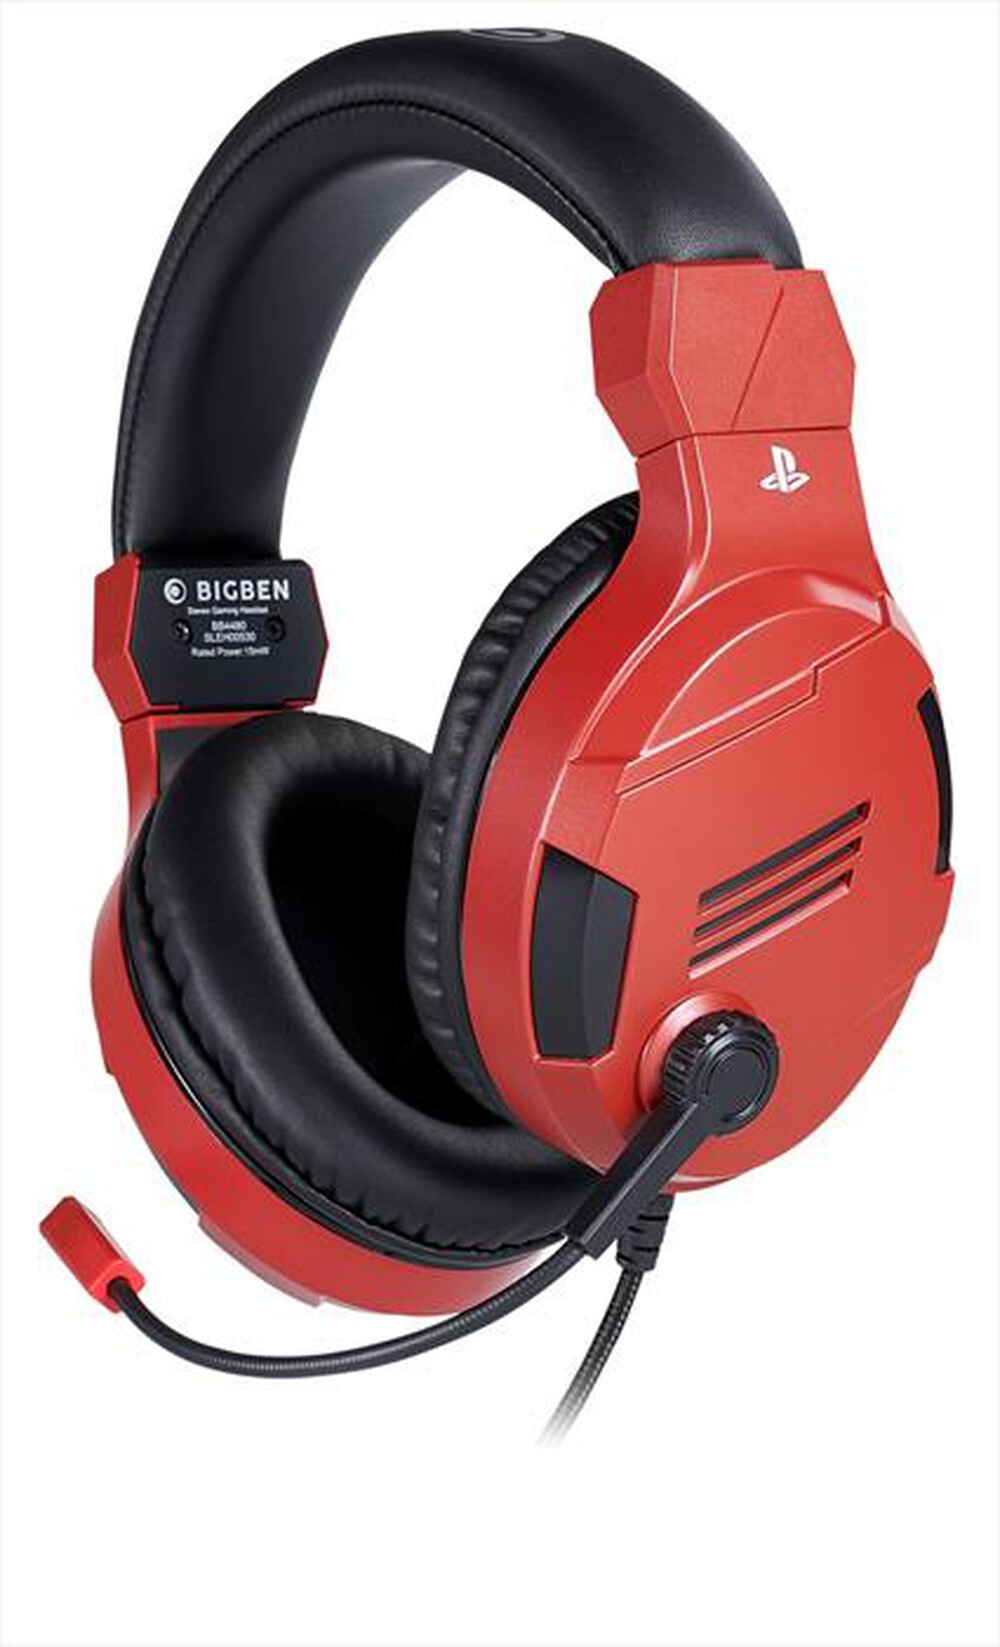 "BIG BEN - PS4OFHEADSETV3RED-Nero/Rosso"